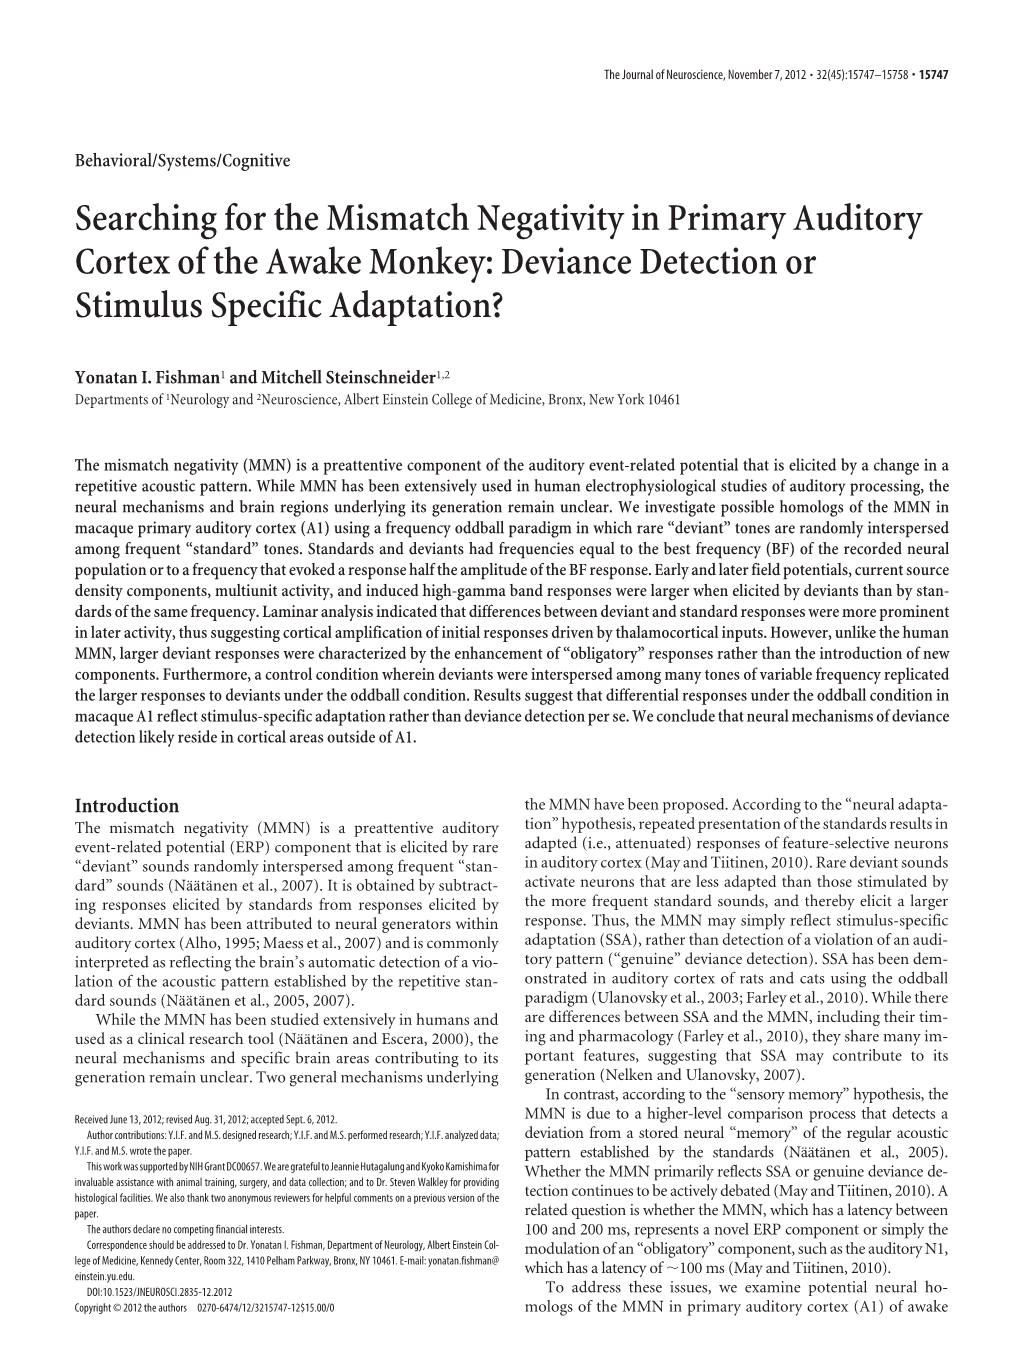 Searching for the Mismatch Negativity in Primary Auditory Cortex of the Awake Monkey: Deviance Detection Or Stimulus Specific Adaptation?